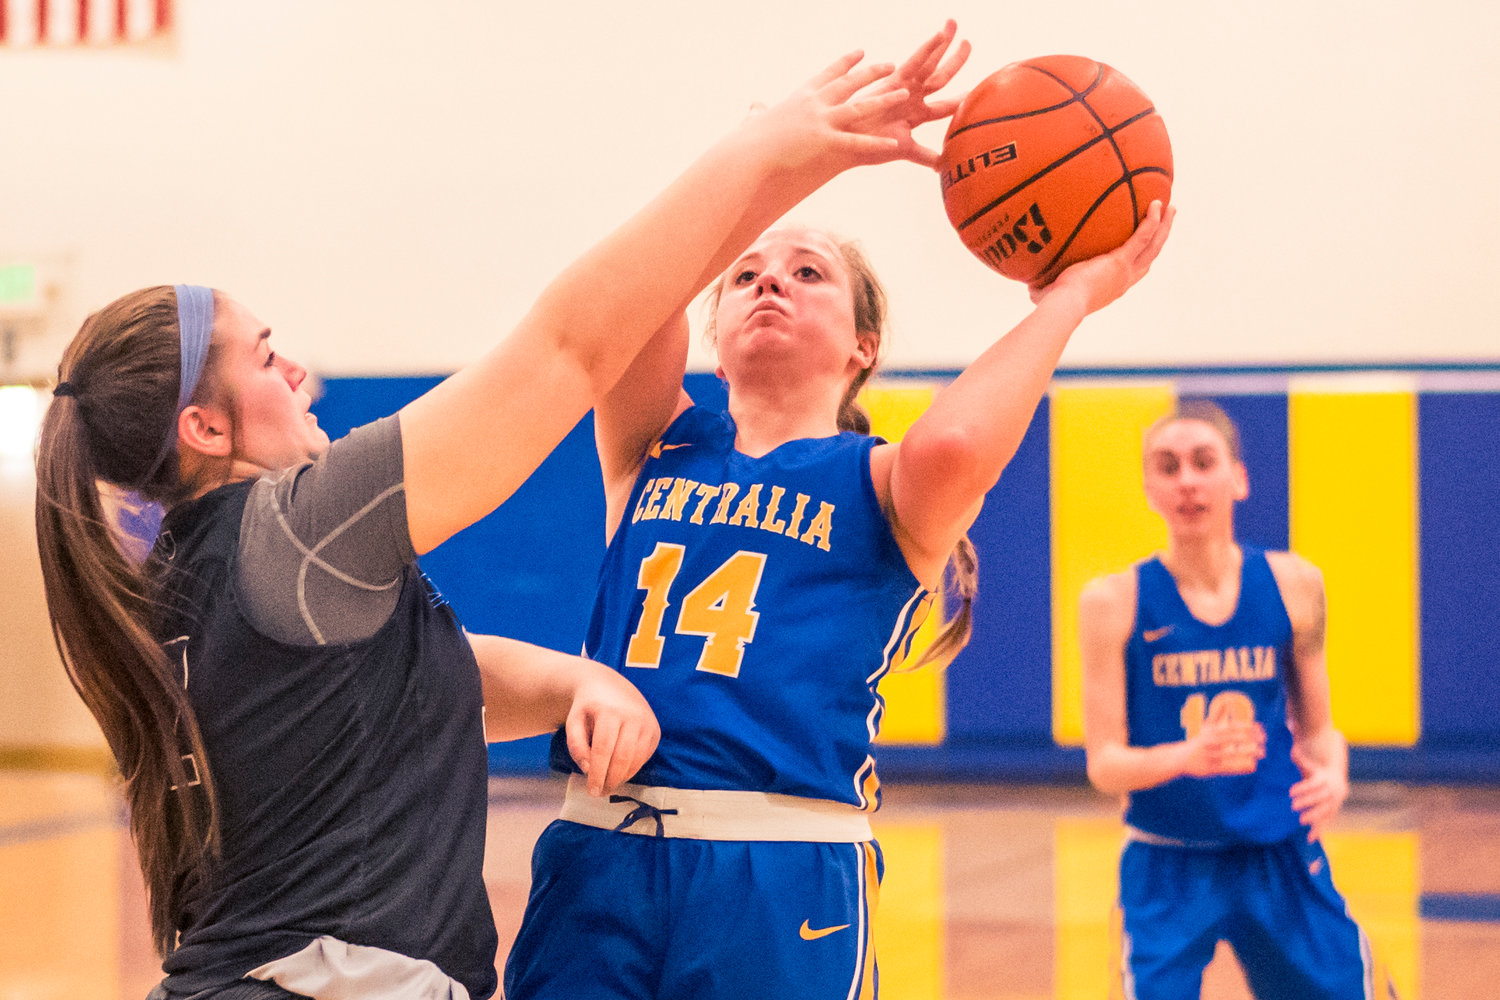 Centralia's Megan Cash (14) puts up a shot during a women's basketball game against S.P.S.C.C Wednesday night at Centralia College.